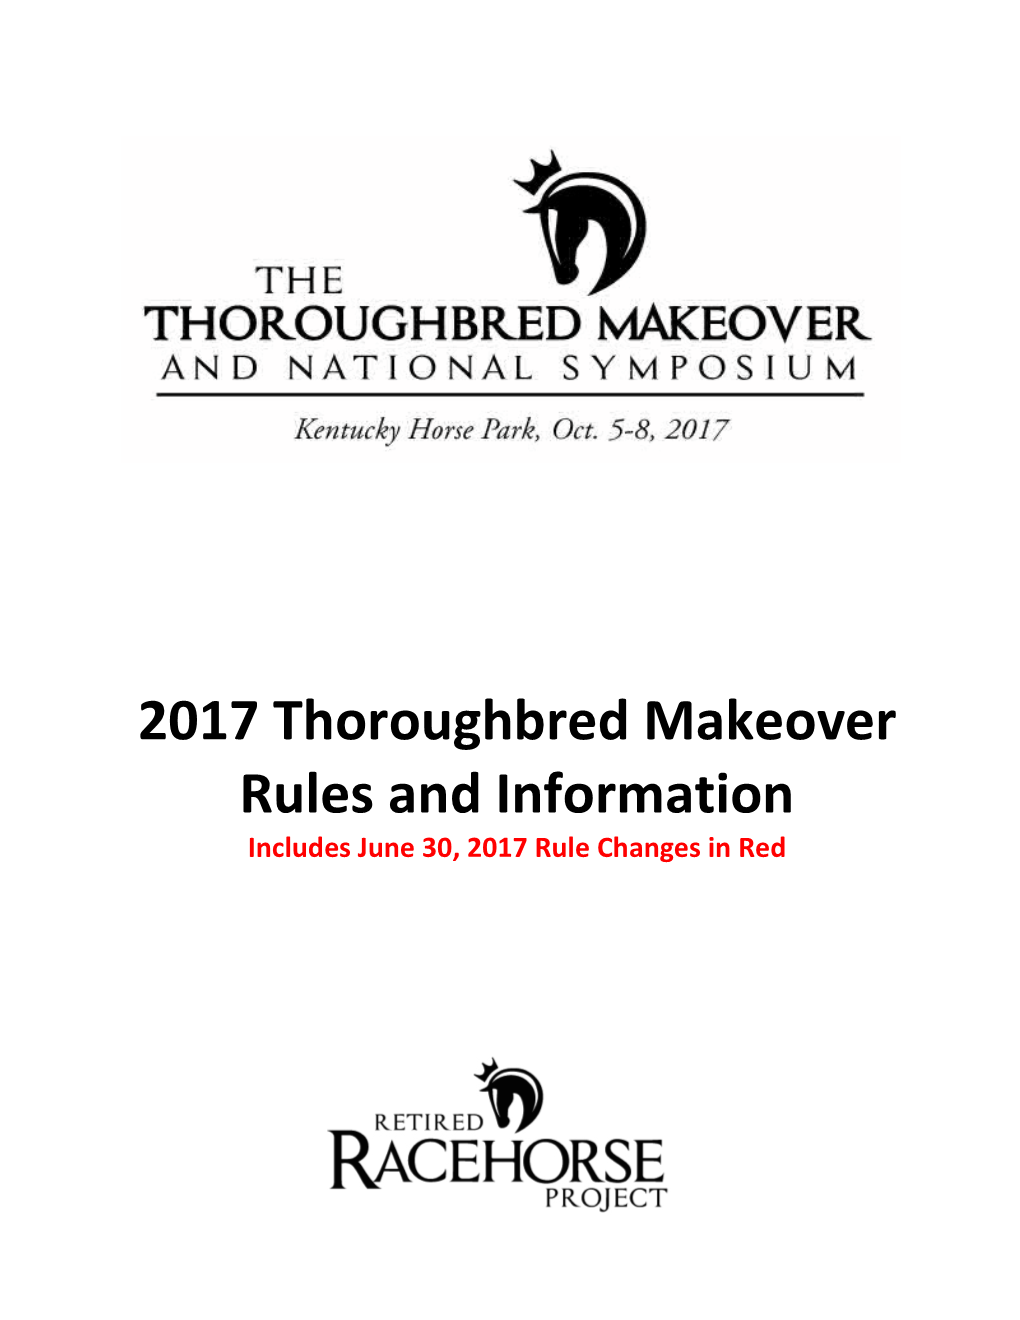 2017 Thoroughbred Makeover Rules and Information Includes June 30, 2017 Rule Changes in Red